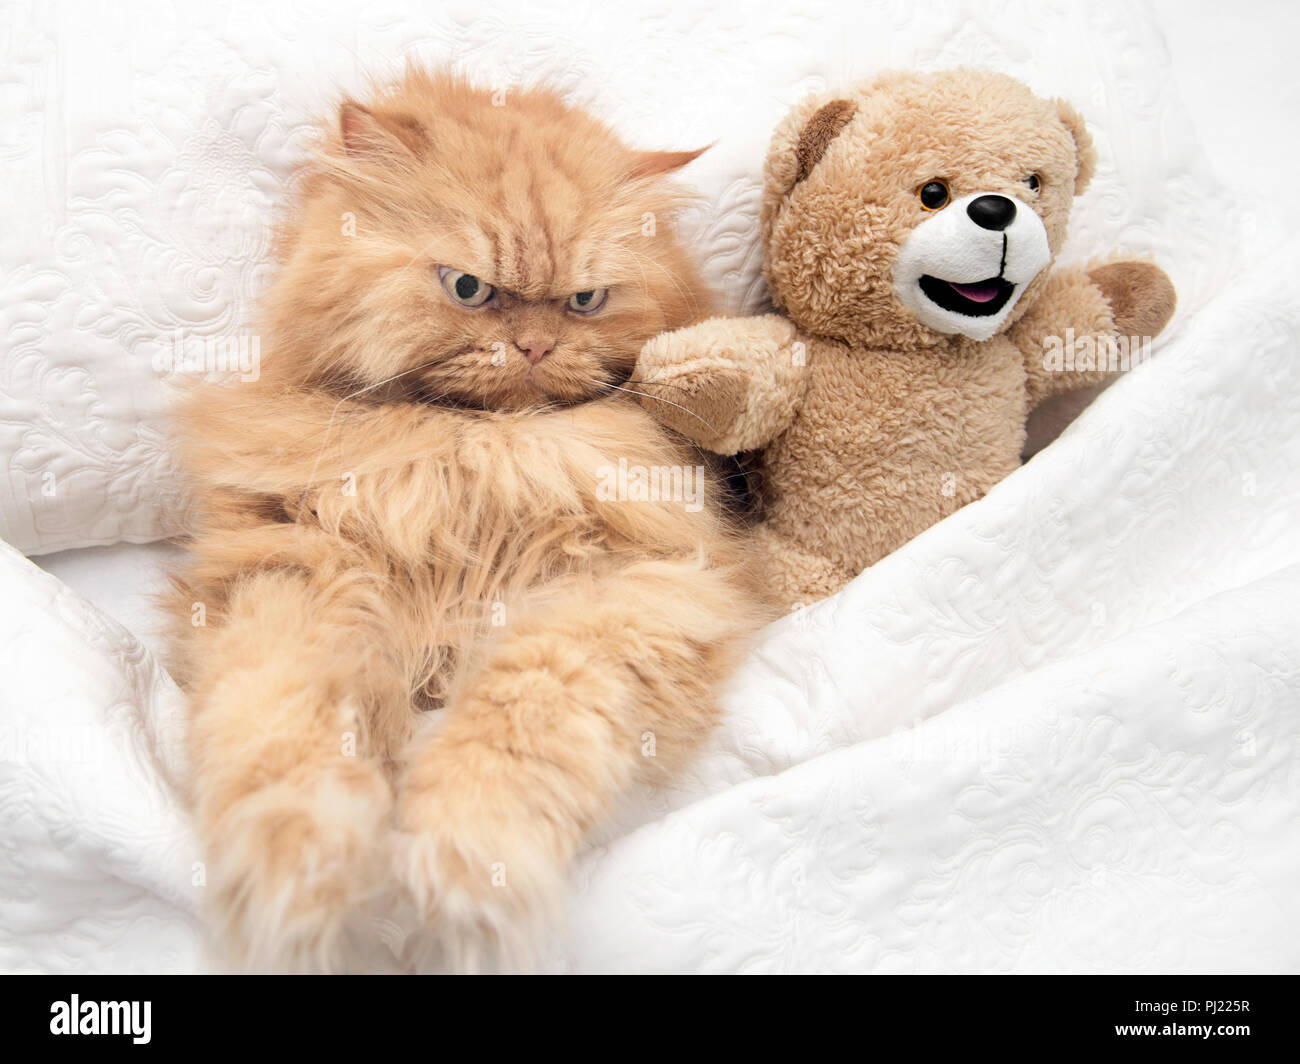 Orange traditional Persian cat in bed with teddy bear Stock Photo